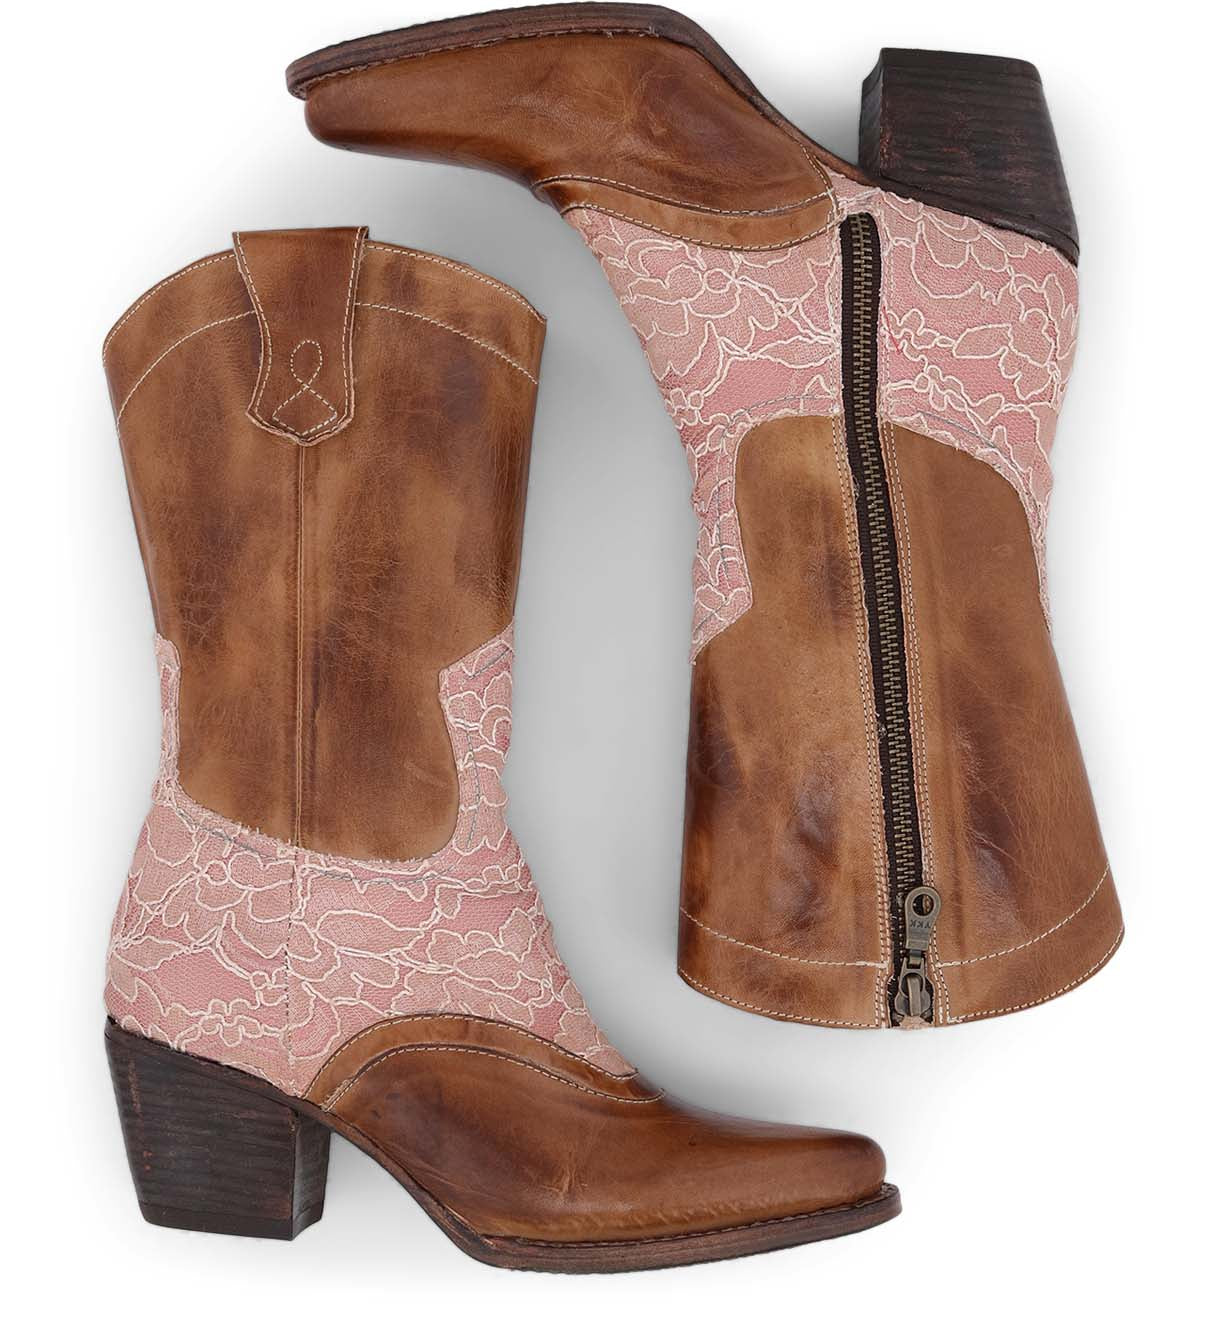 A pair of Oak Tree Farms hand-tooled leather cowboy boots with pink lace, inspired by Basanti.